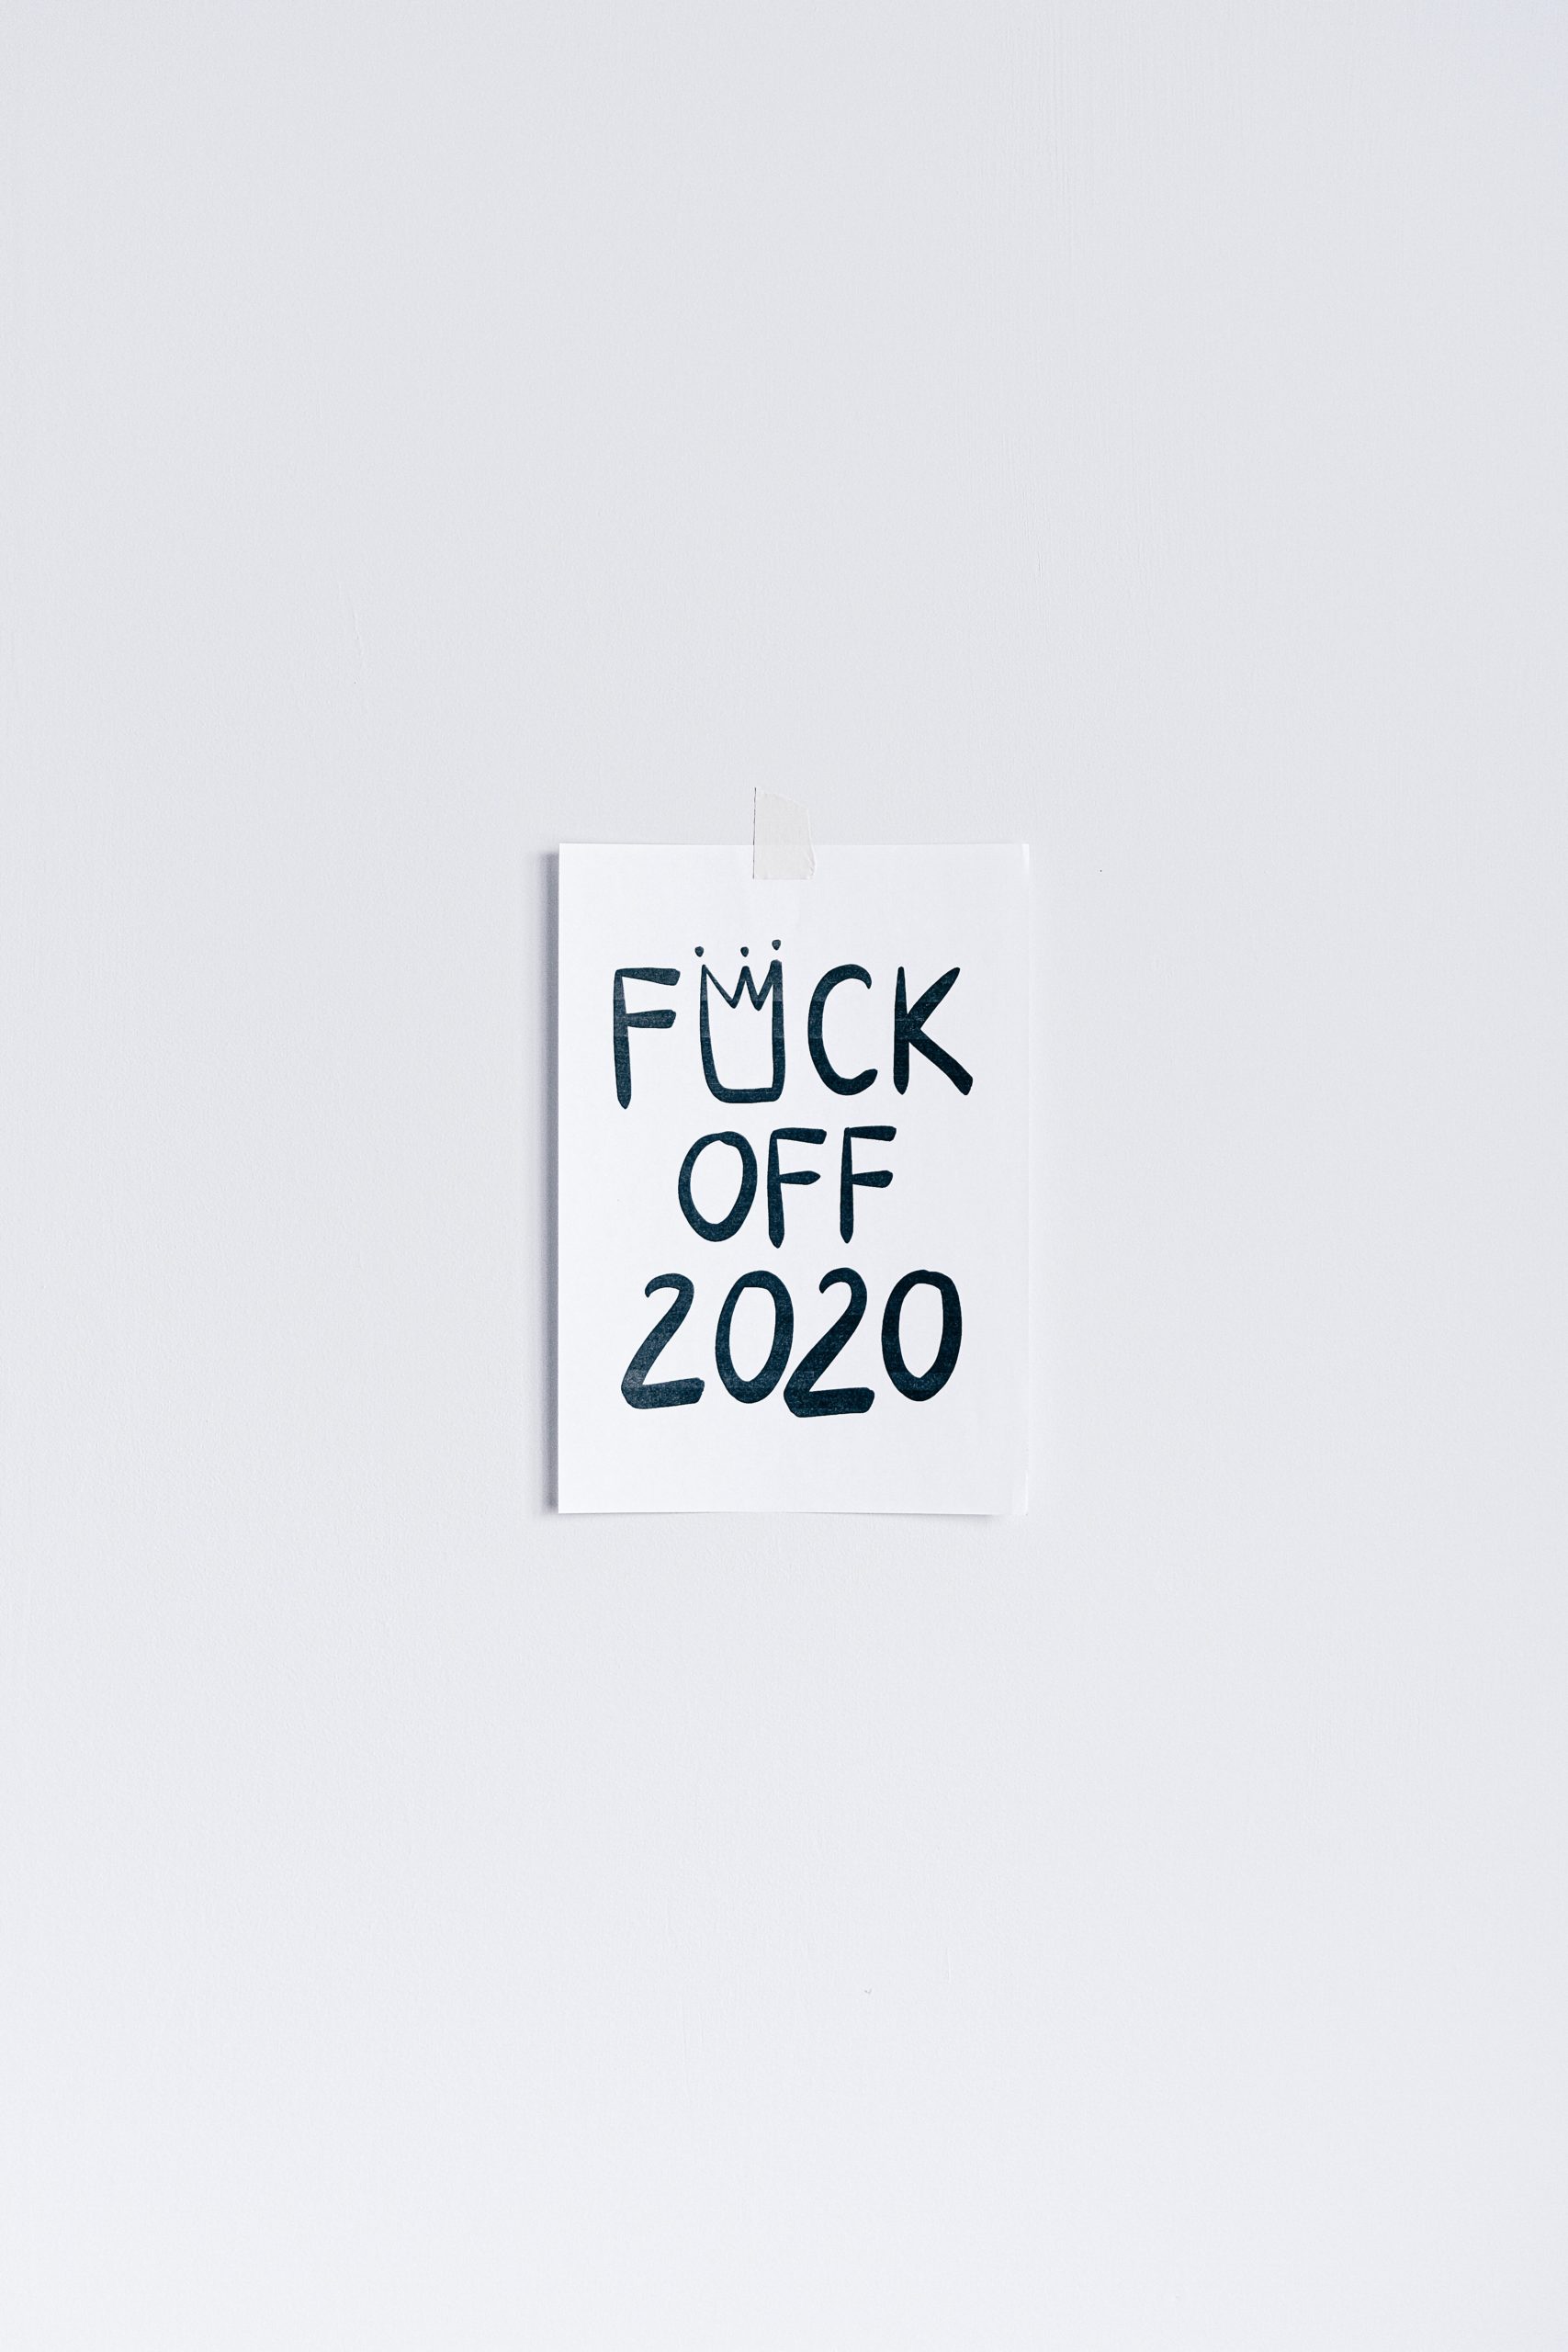 A piece of paper written "fuck off 2020" hanging on a wall